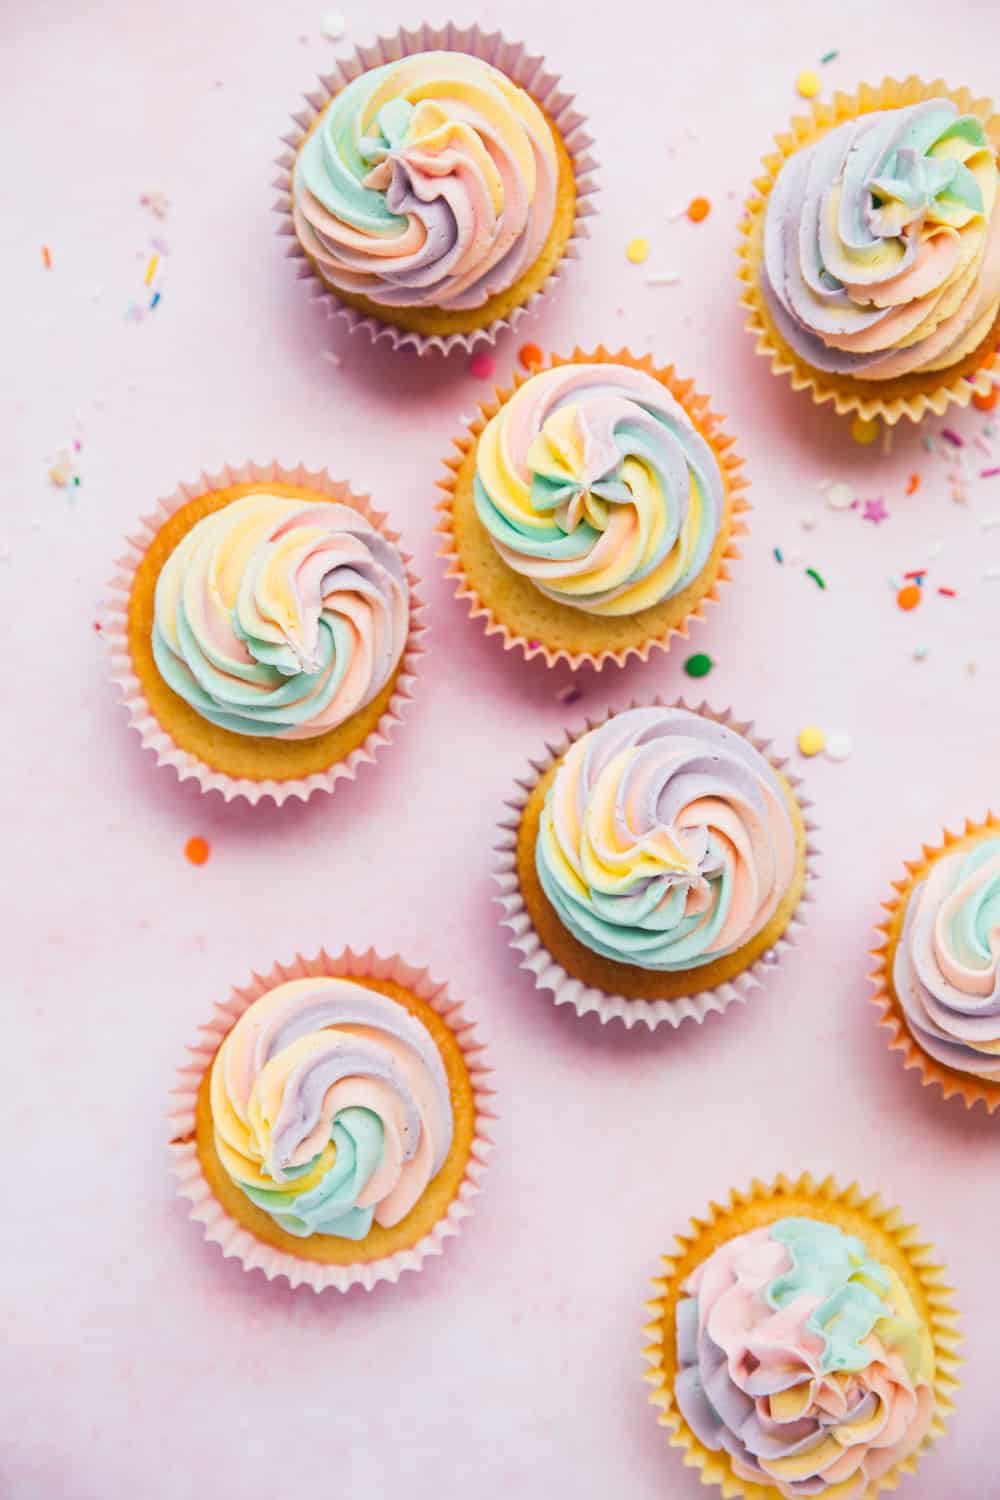 Overhead shot of cupcakes with rainbow coloured icing. There is a cupcake liner filled with round colourful sprinkles and a brightly coloured napkin. 